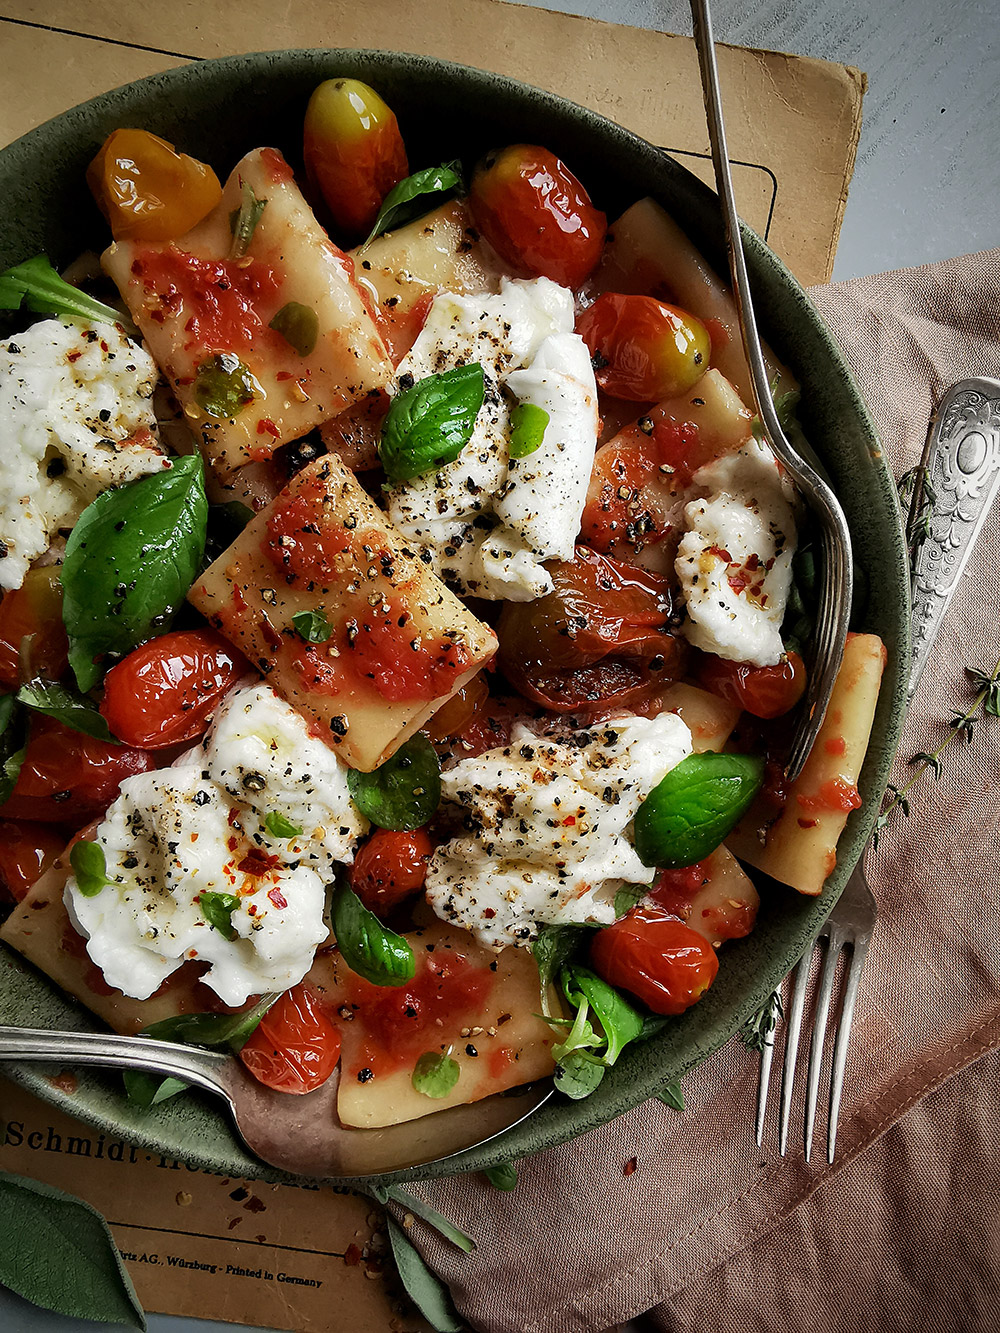 Paccheri, burrata and garlicky roasted tomatoes